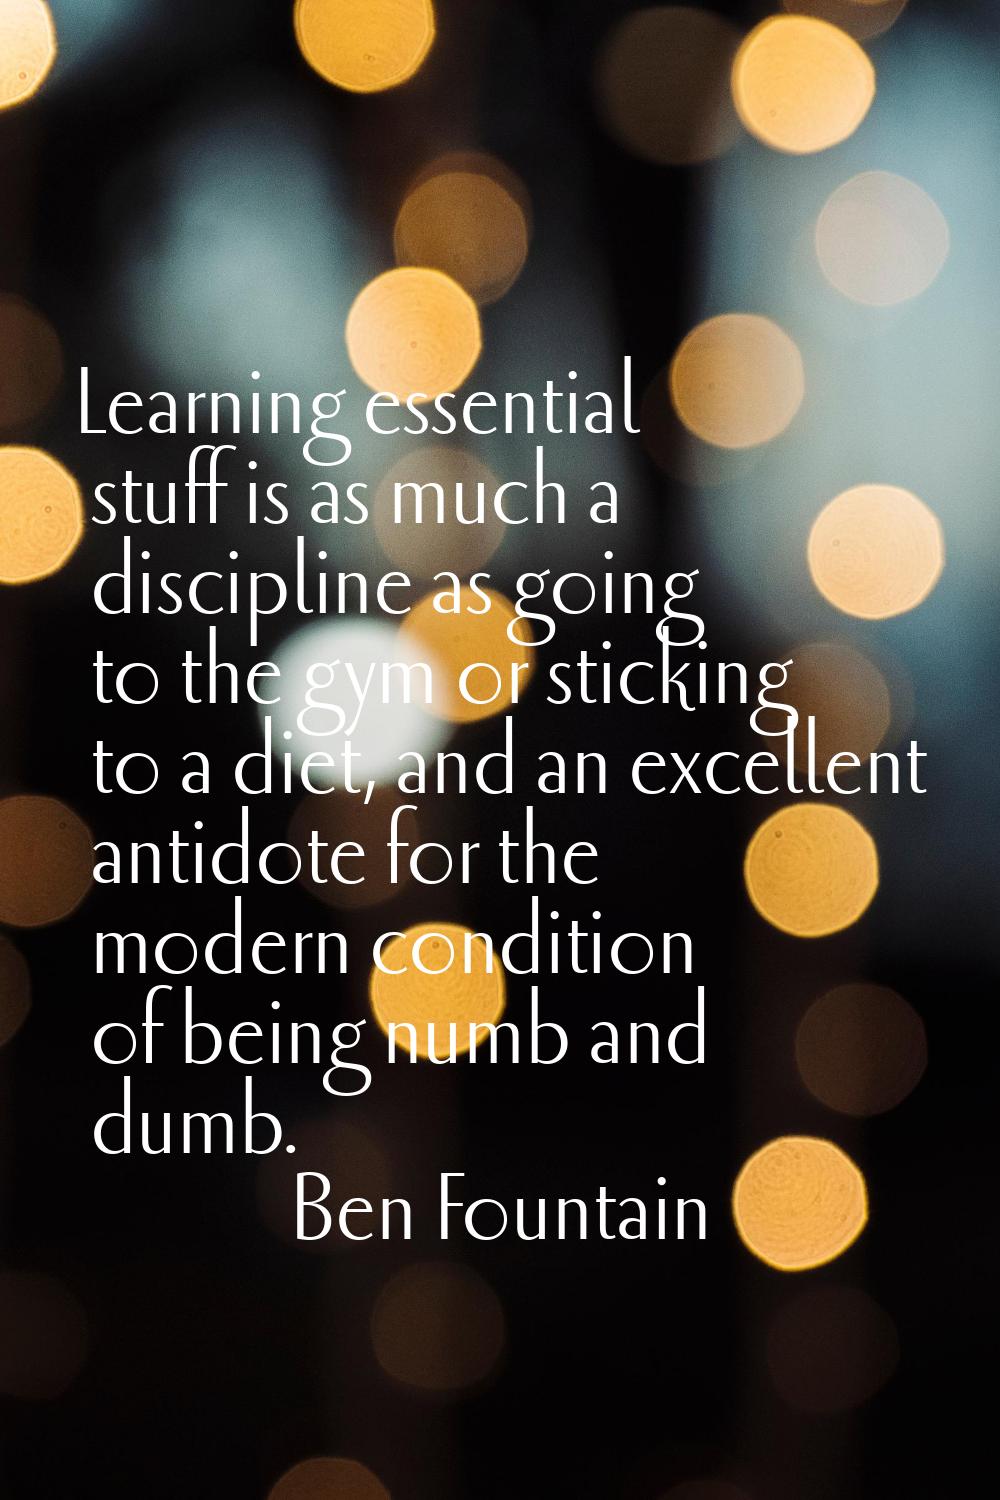 Learning essential stuff is as much a discipline as going to the gym or sticking to a diet, and an 